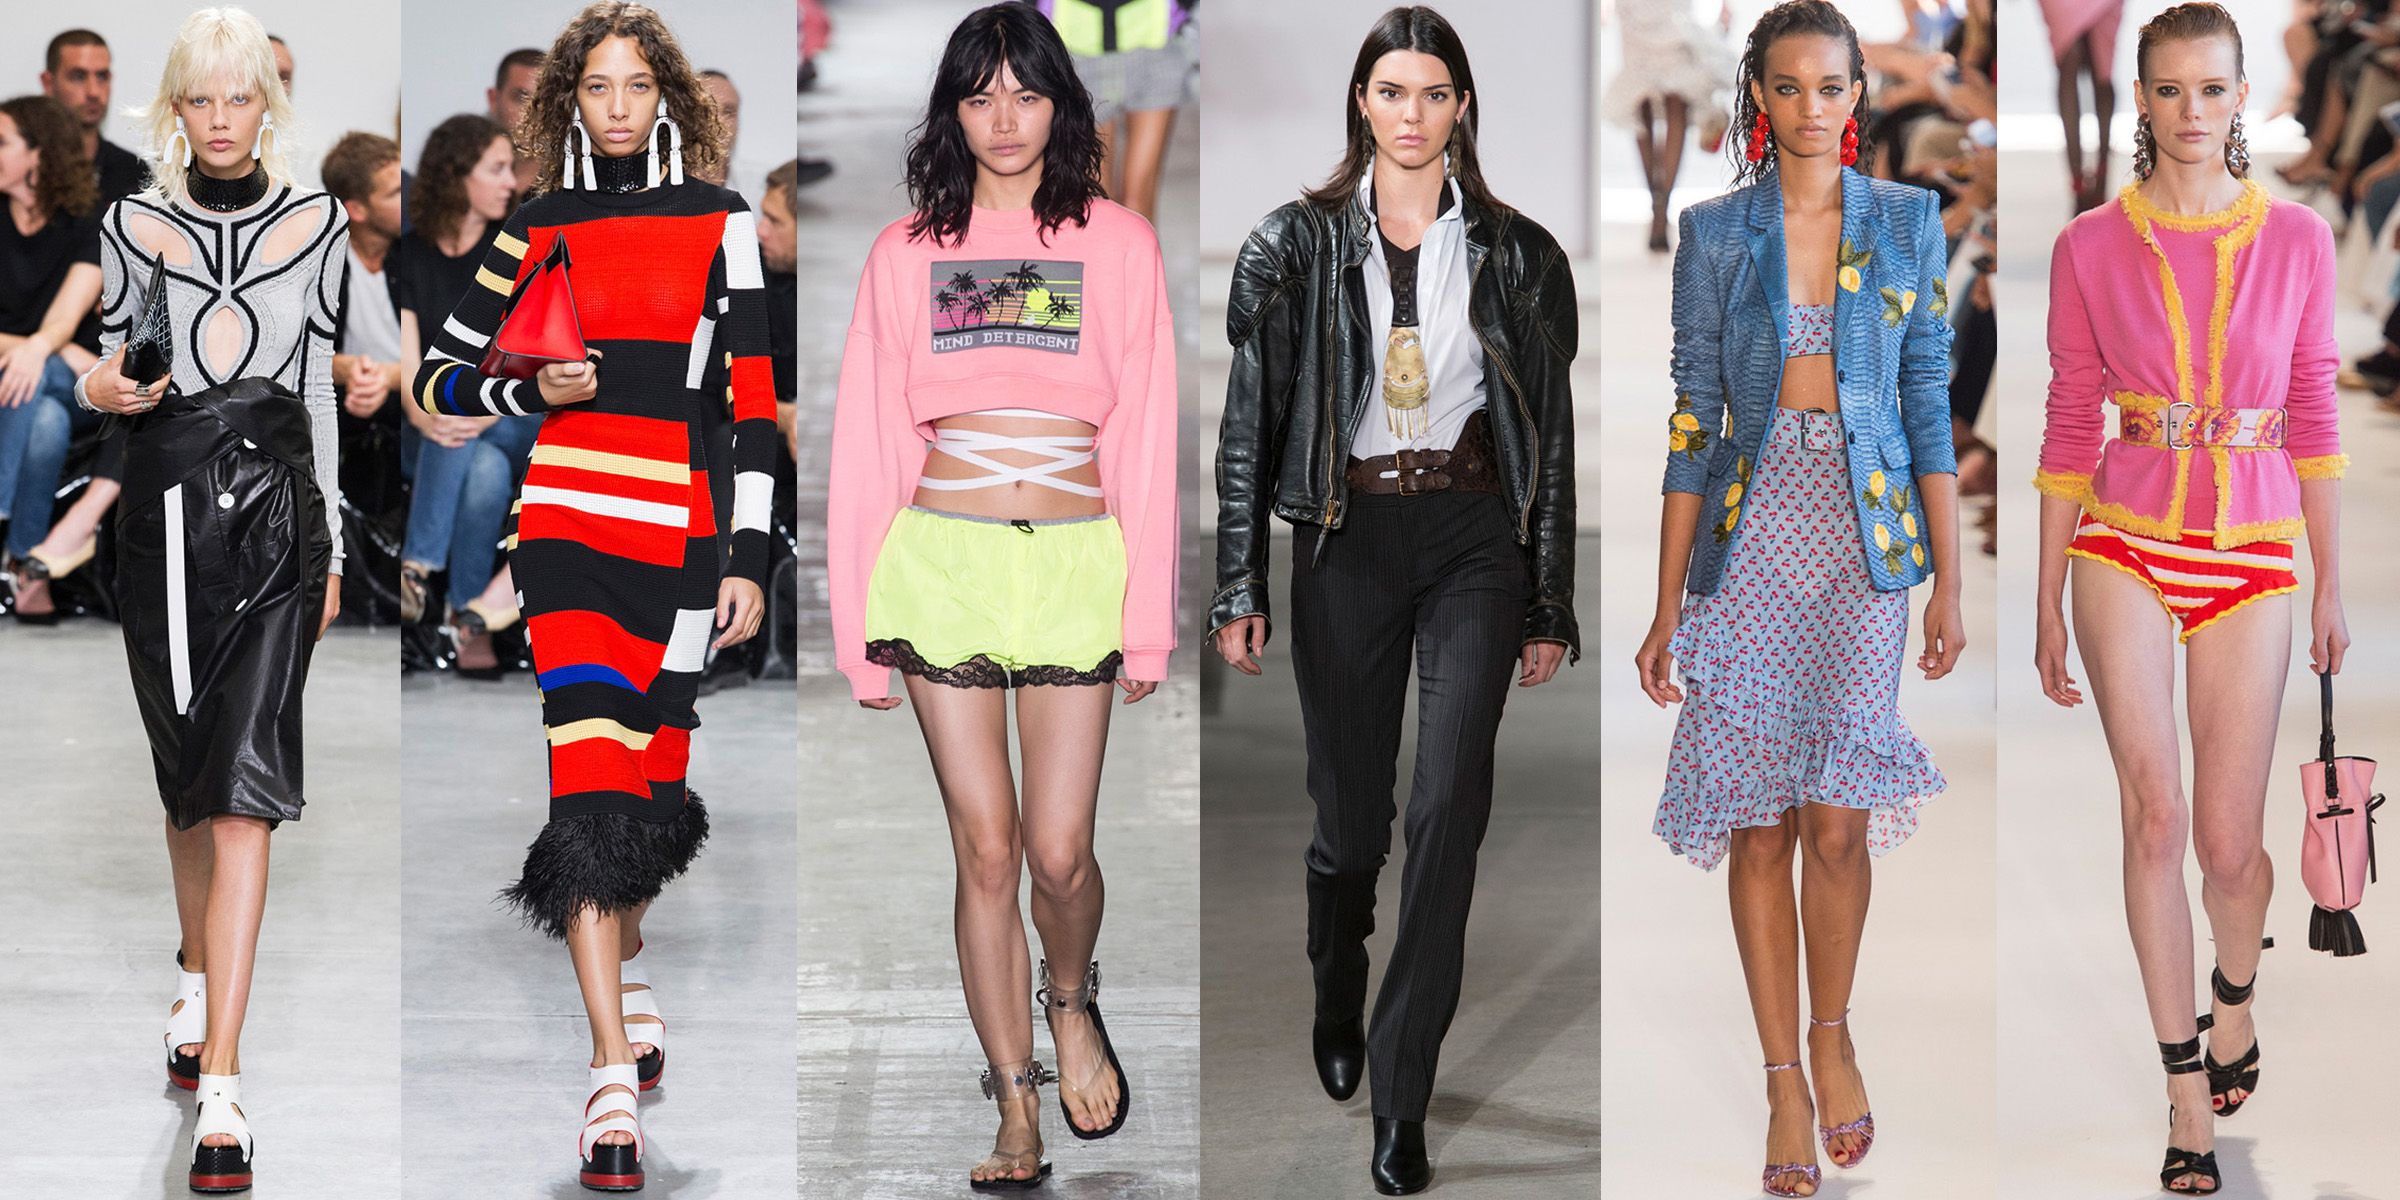 Spring 17 Fashion Trends From Nyfw Spring 17 Runway Fashion Trends